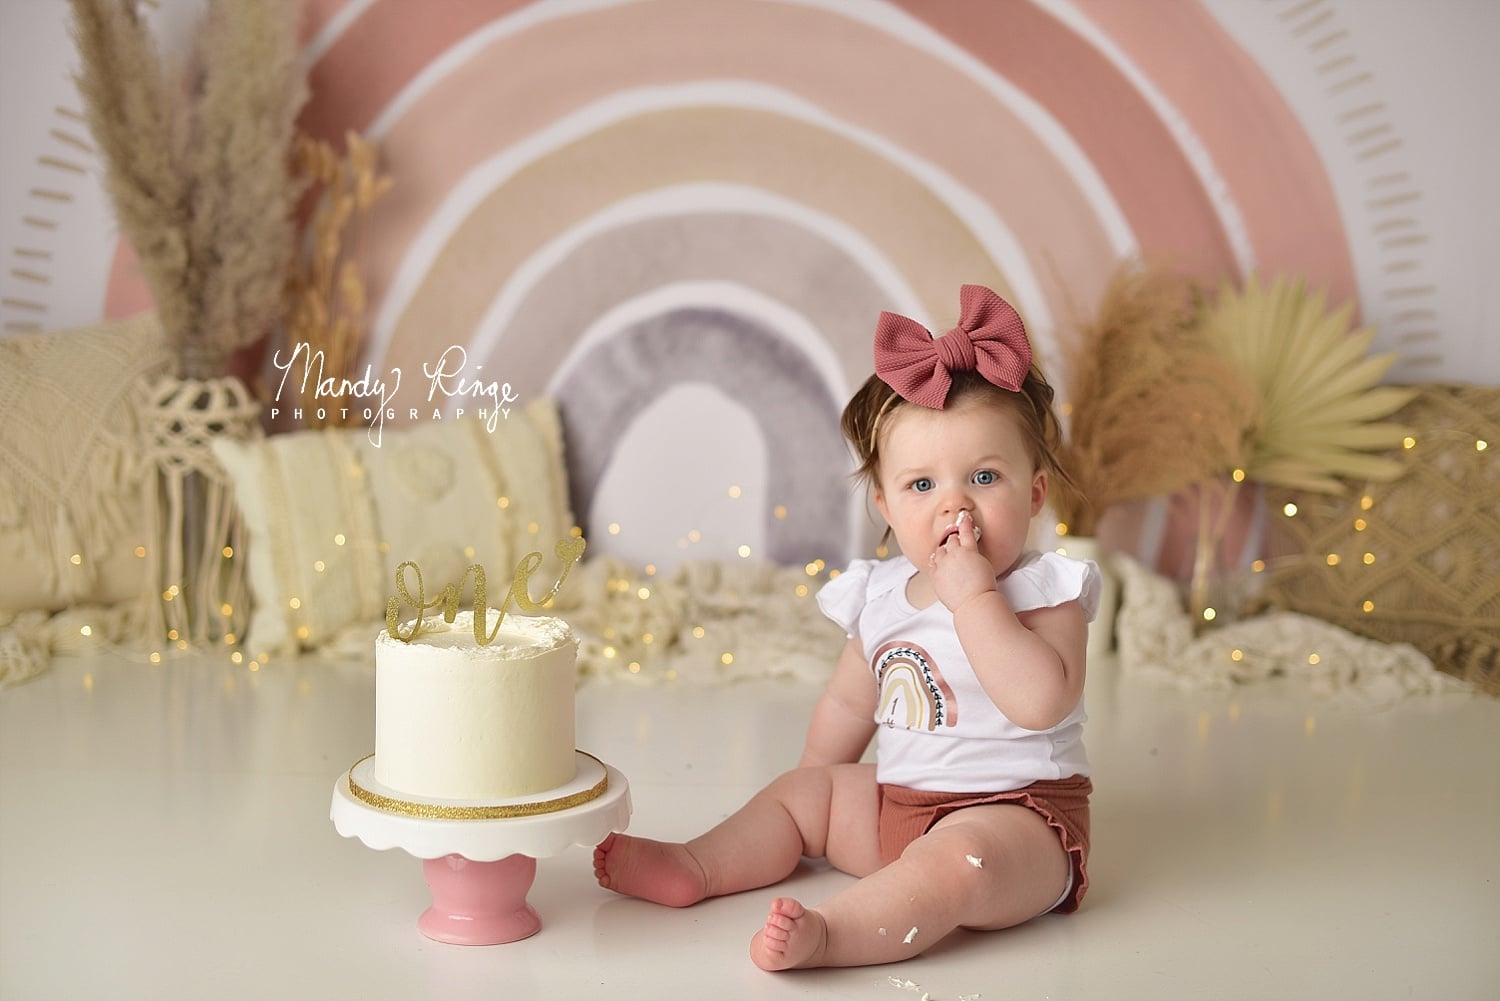 Kate Boho Rainbow Backdrop Designed by Mandy Ringe Photography (US ONLY) (Clearance US only)